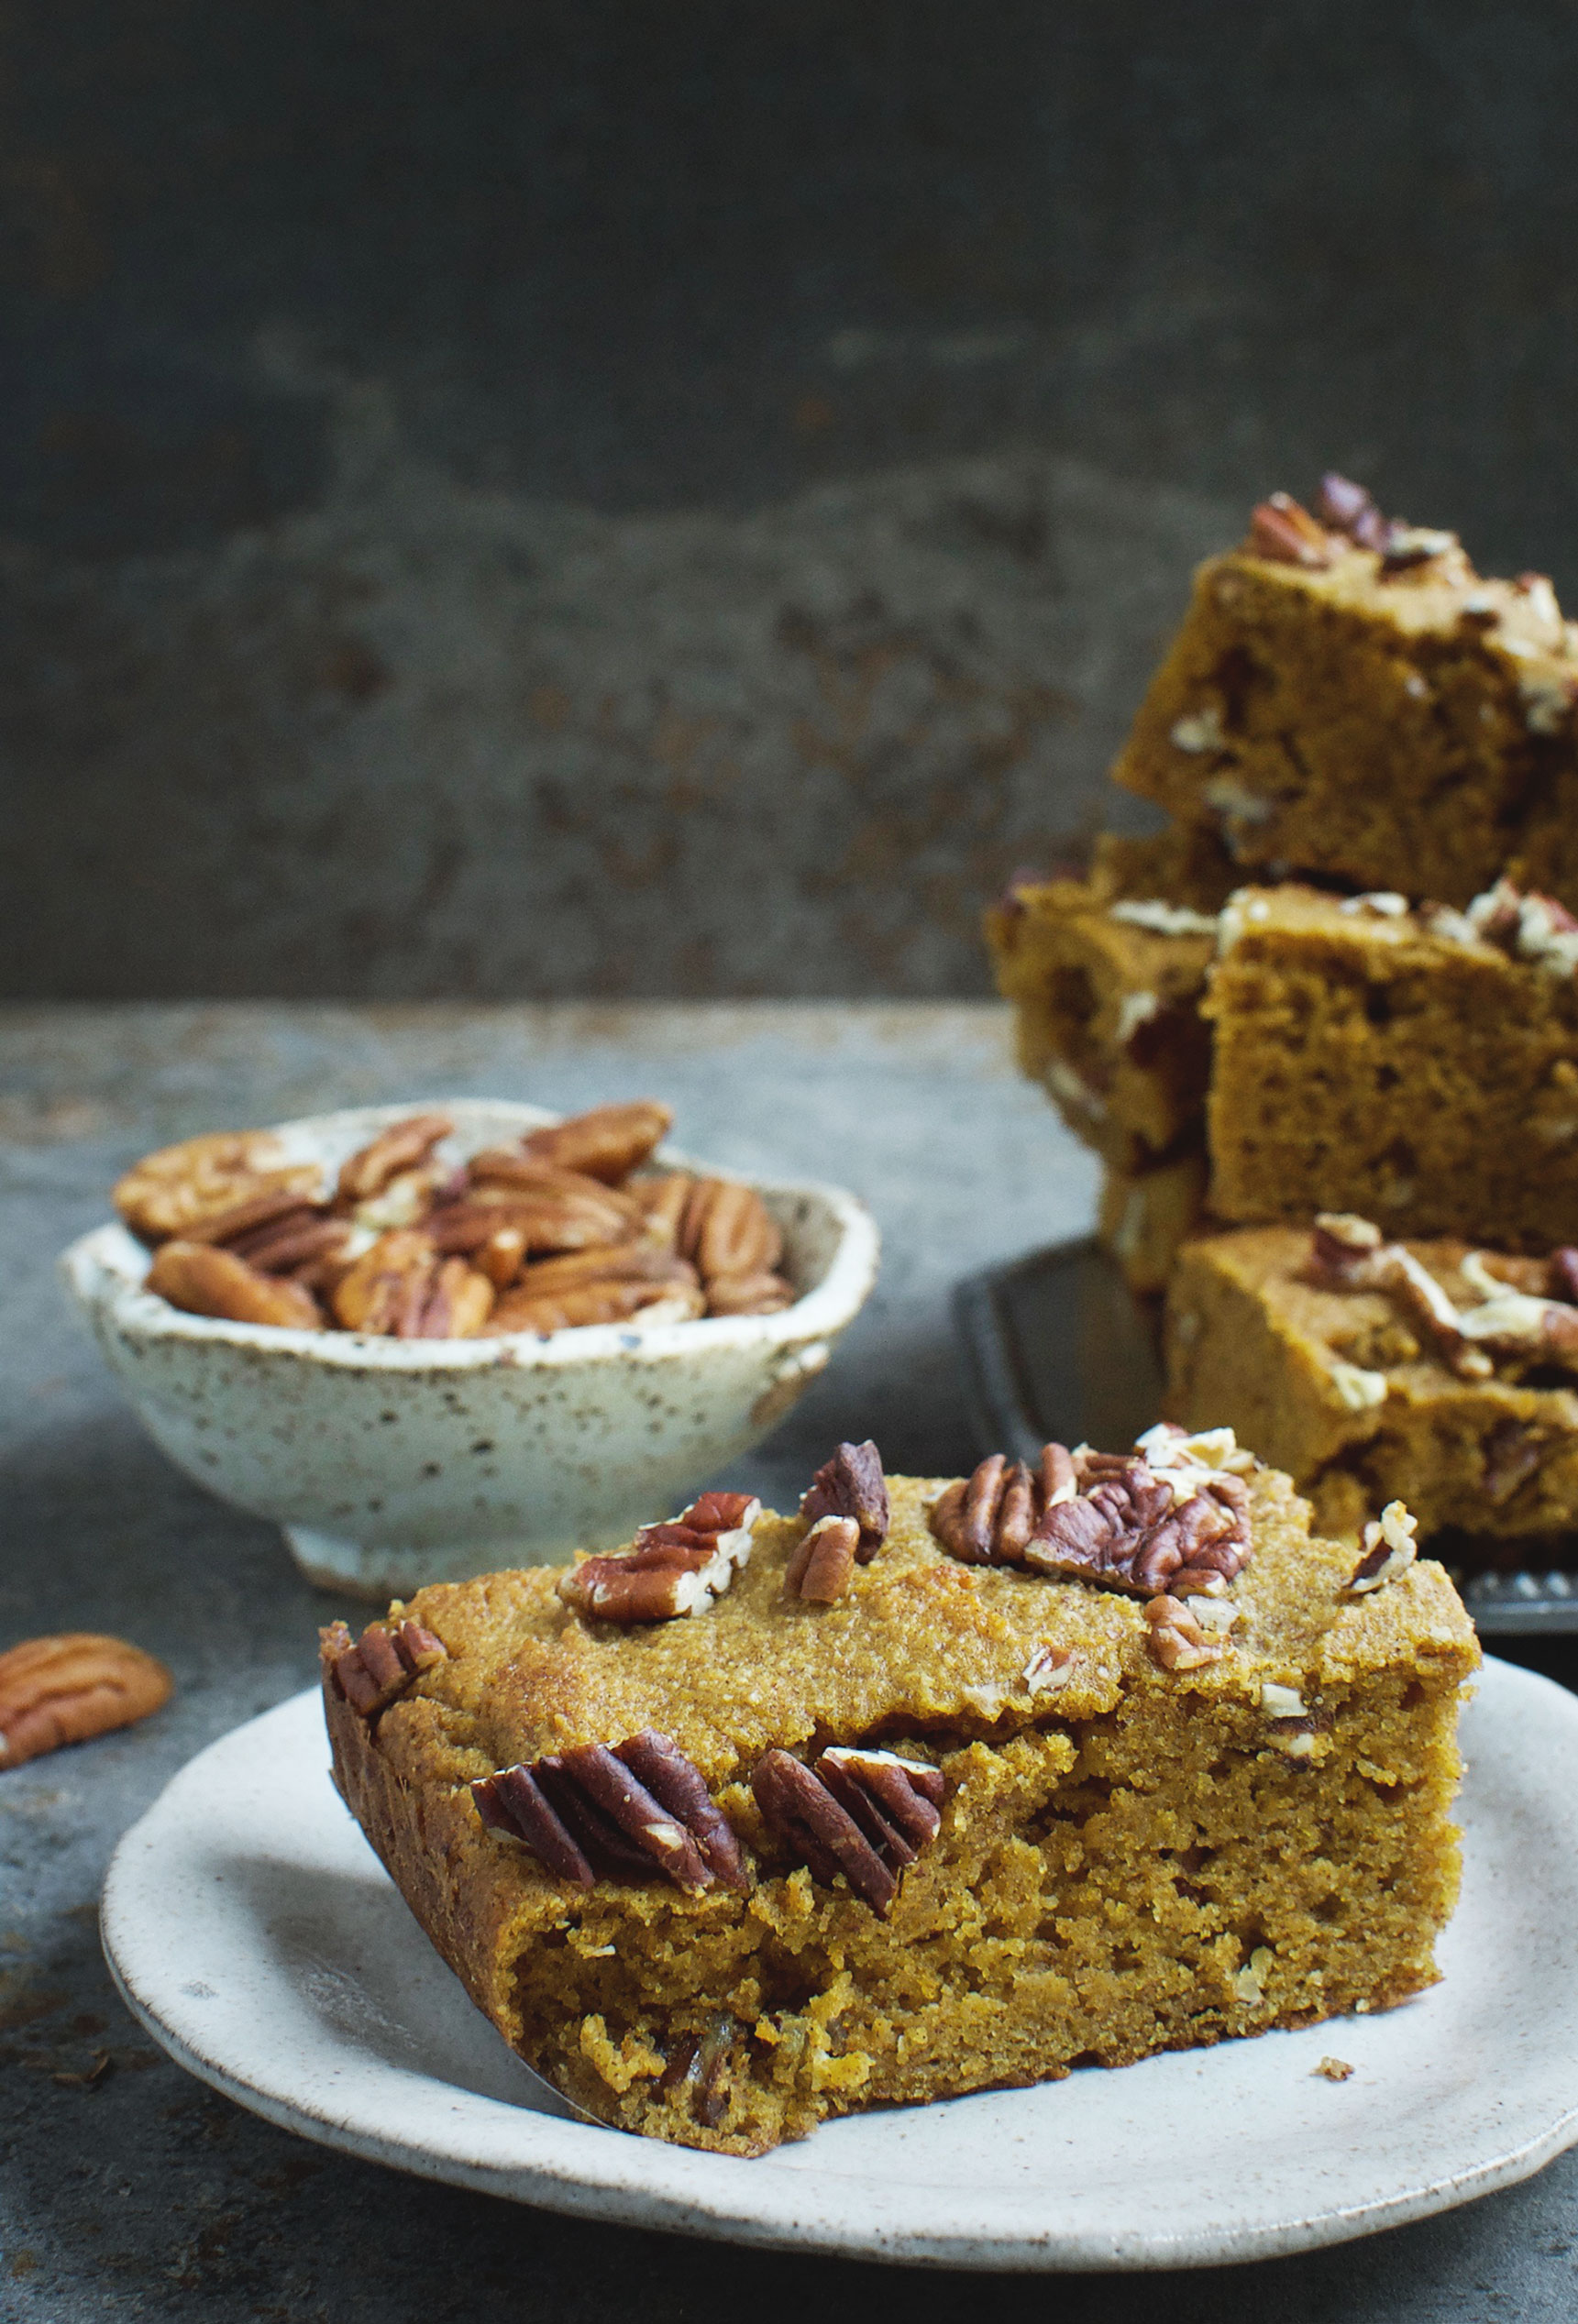 These Low-Carb Pumpkin Pecan Bars make a delicious fall dessert or snack. This bar cookie recipe can work for those who follow low-carb, ketogenic, Atkins, gluten-free, grain-free, diabetic, or Banting diets.